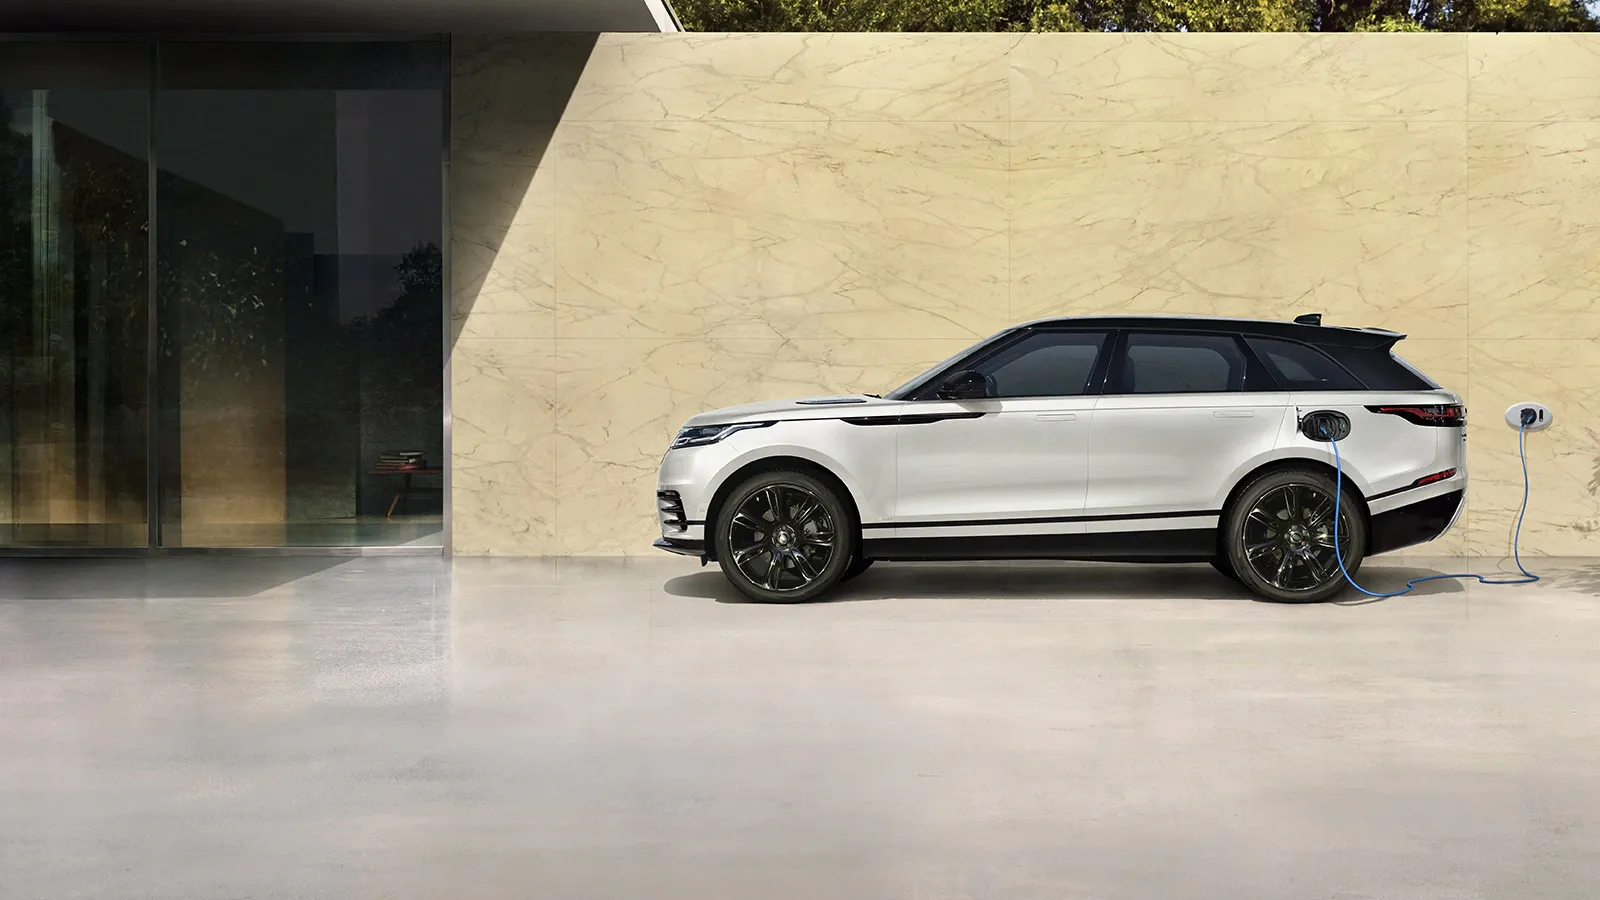 Side view of a white Range Rover Evoque plugged into a charger